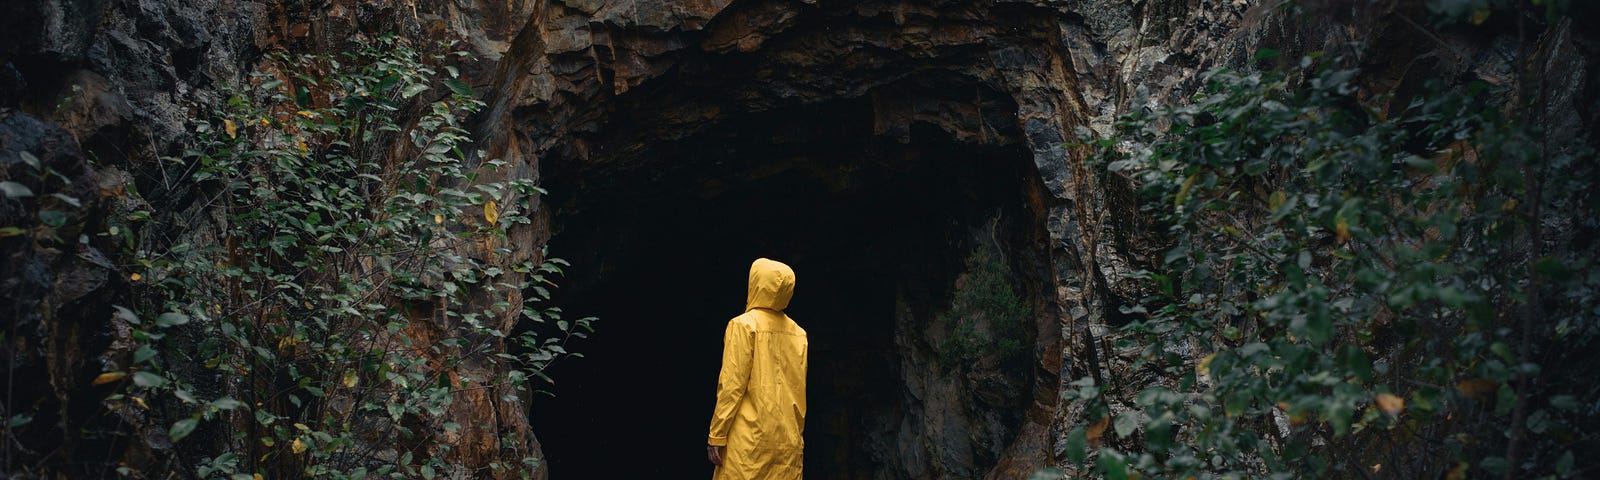 A woman in a strong yellow raincoat standing at the entrance of a large cave looking at its darkness. We all go though dark moments. But can come out strengthened.